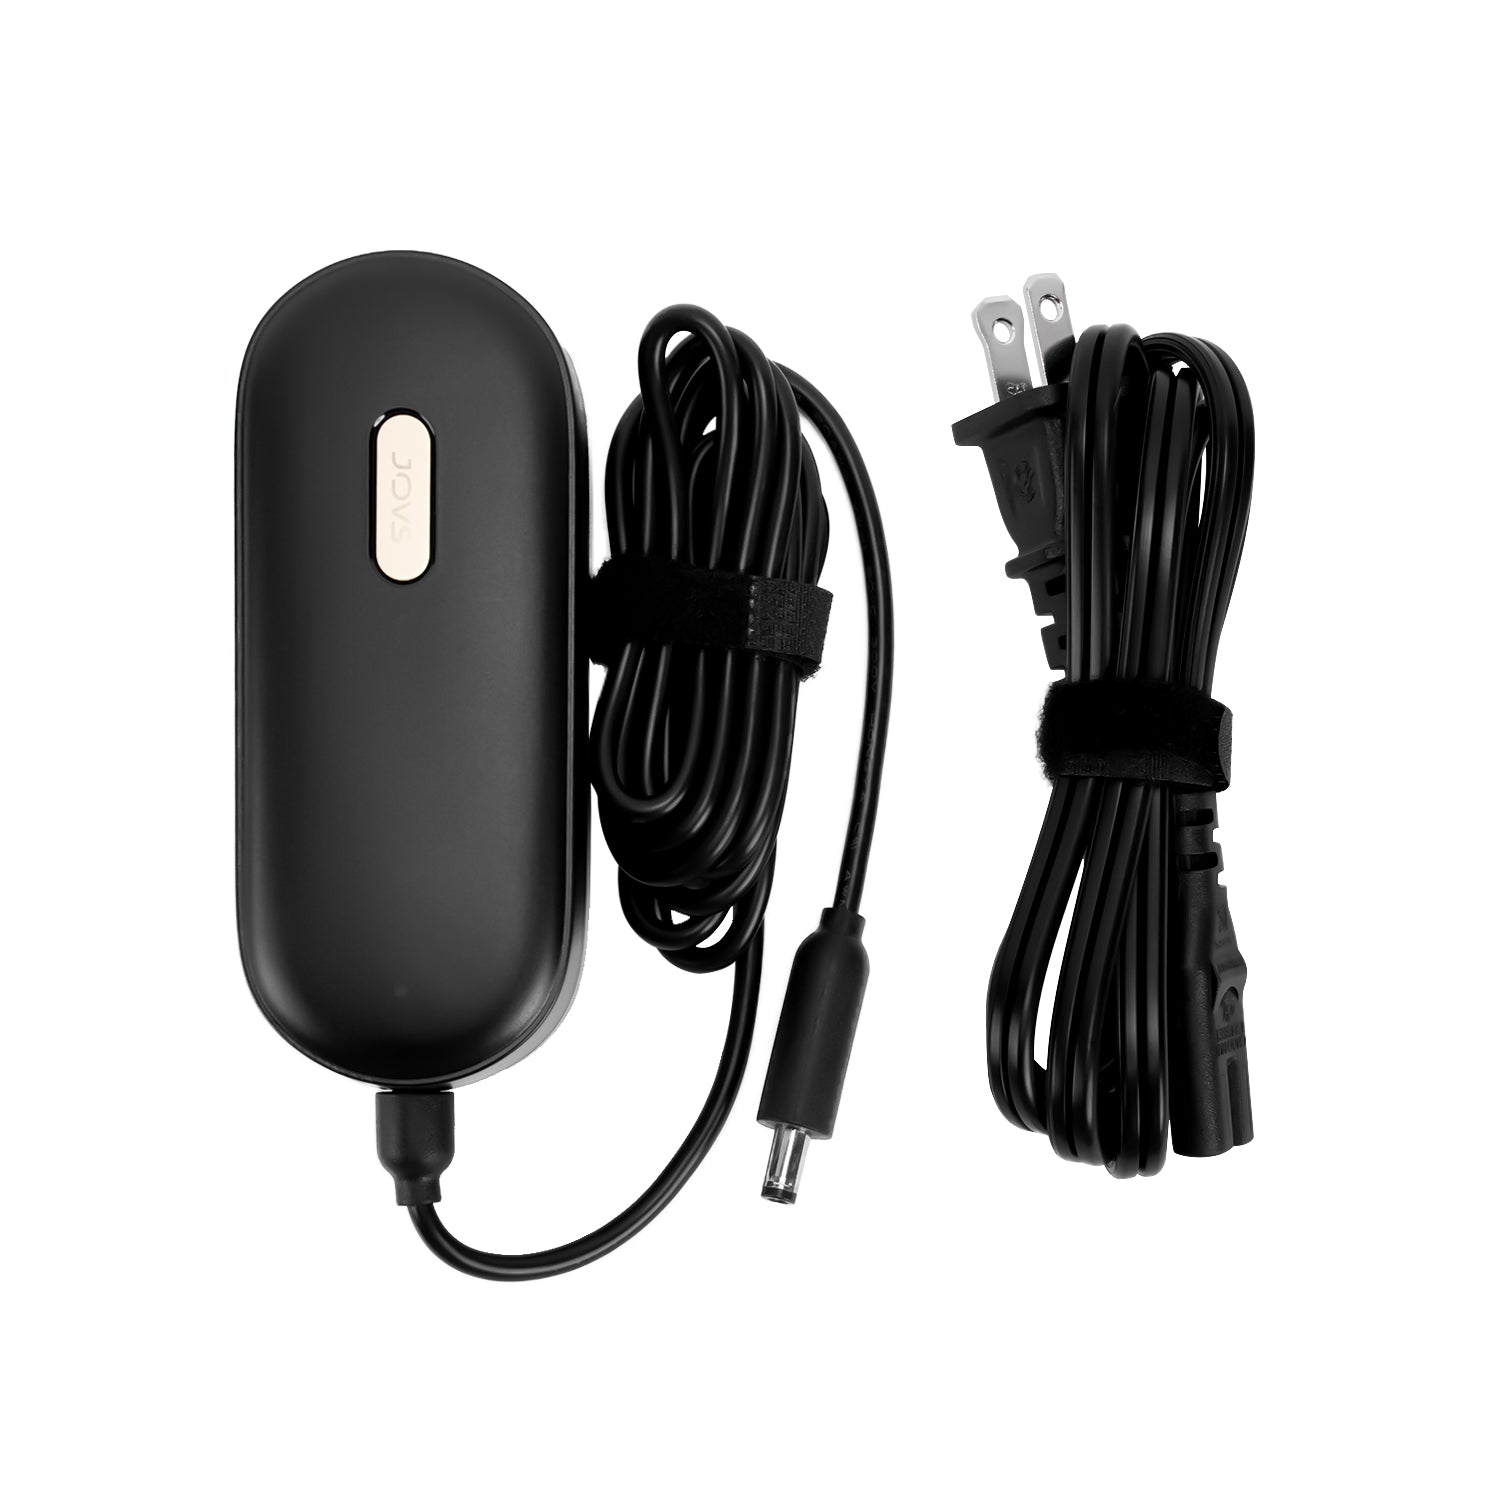 JOVS Universal Charging Adapter, compatible with JOVS Blacken DPL, Venus Pro II, Mini Wireless, and JOVS X Devices for hair removal and skin care.